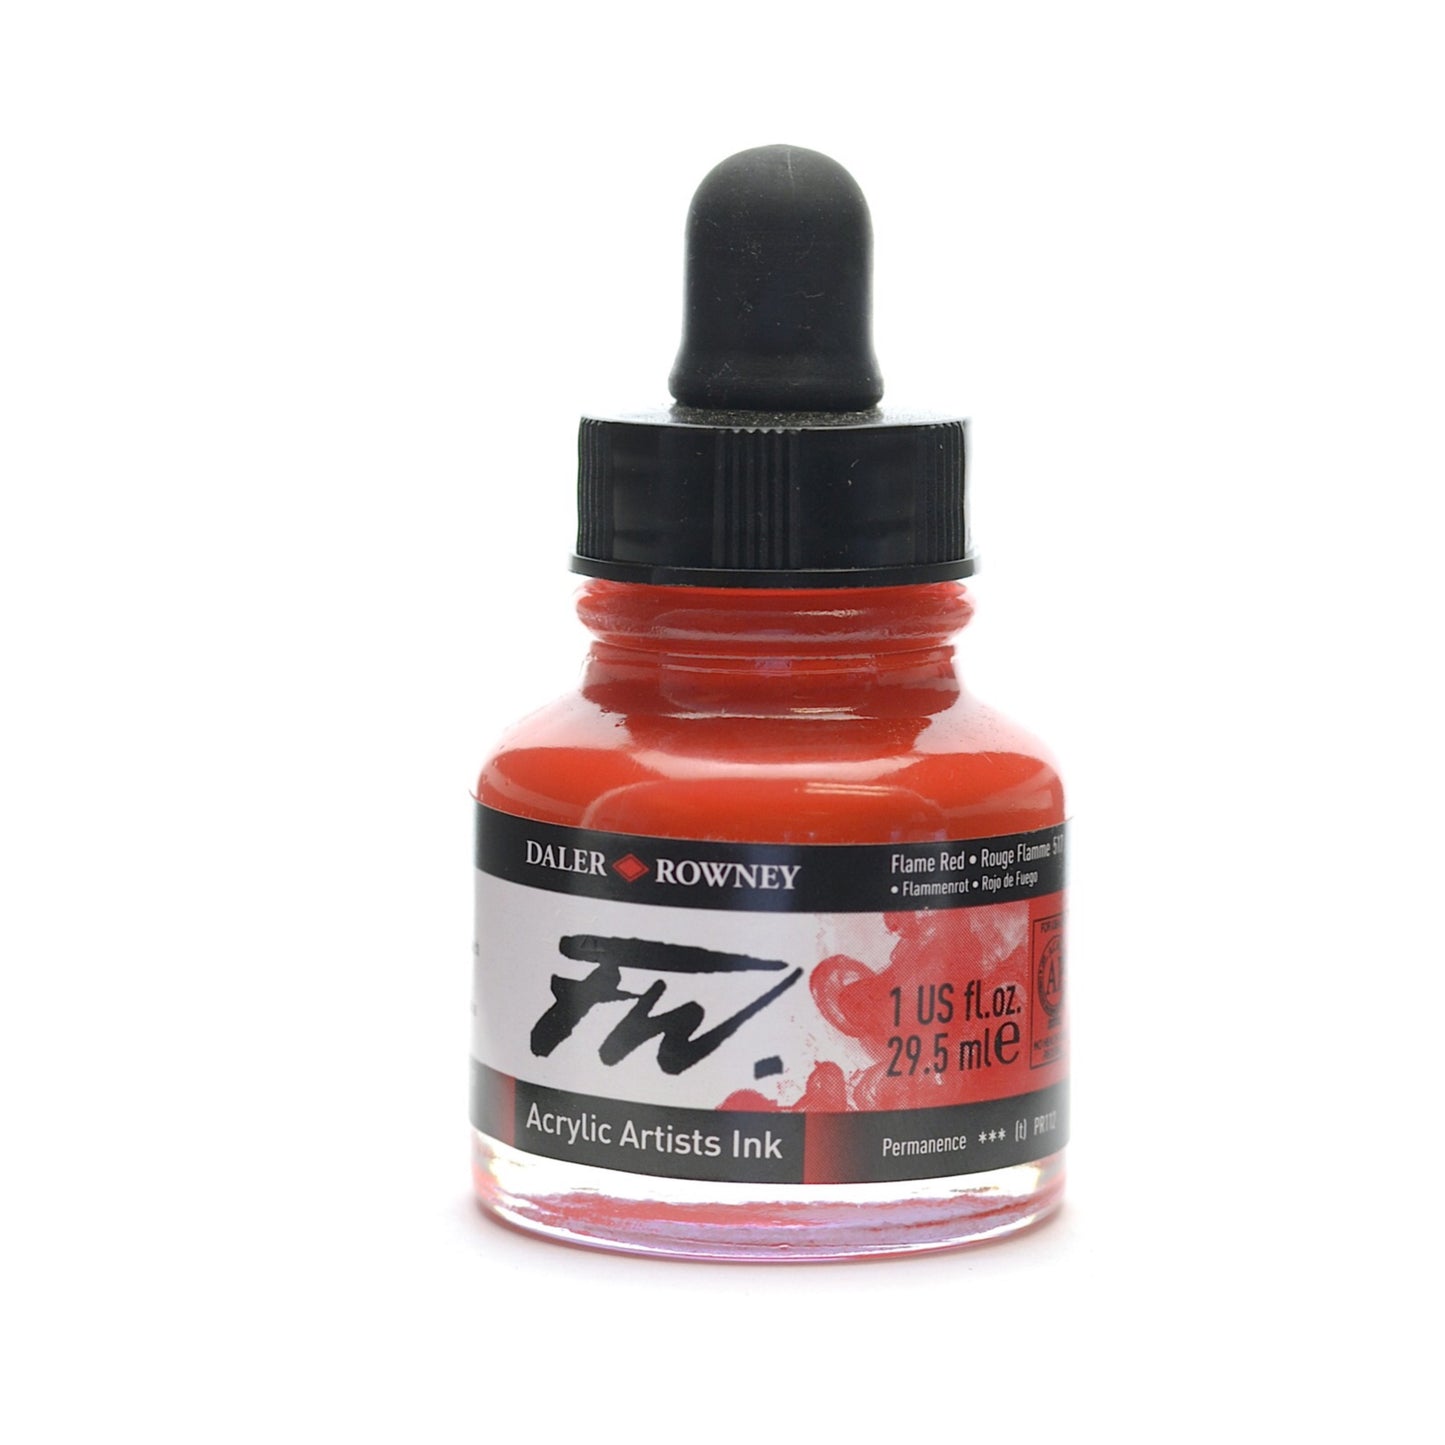 Daler-Rowney FW Acrylic Ink - Flame Red by Daler Rowney - K. A. Artist Shop